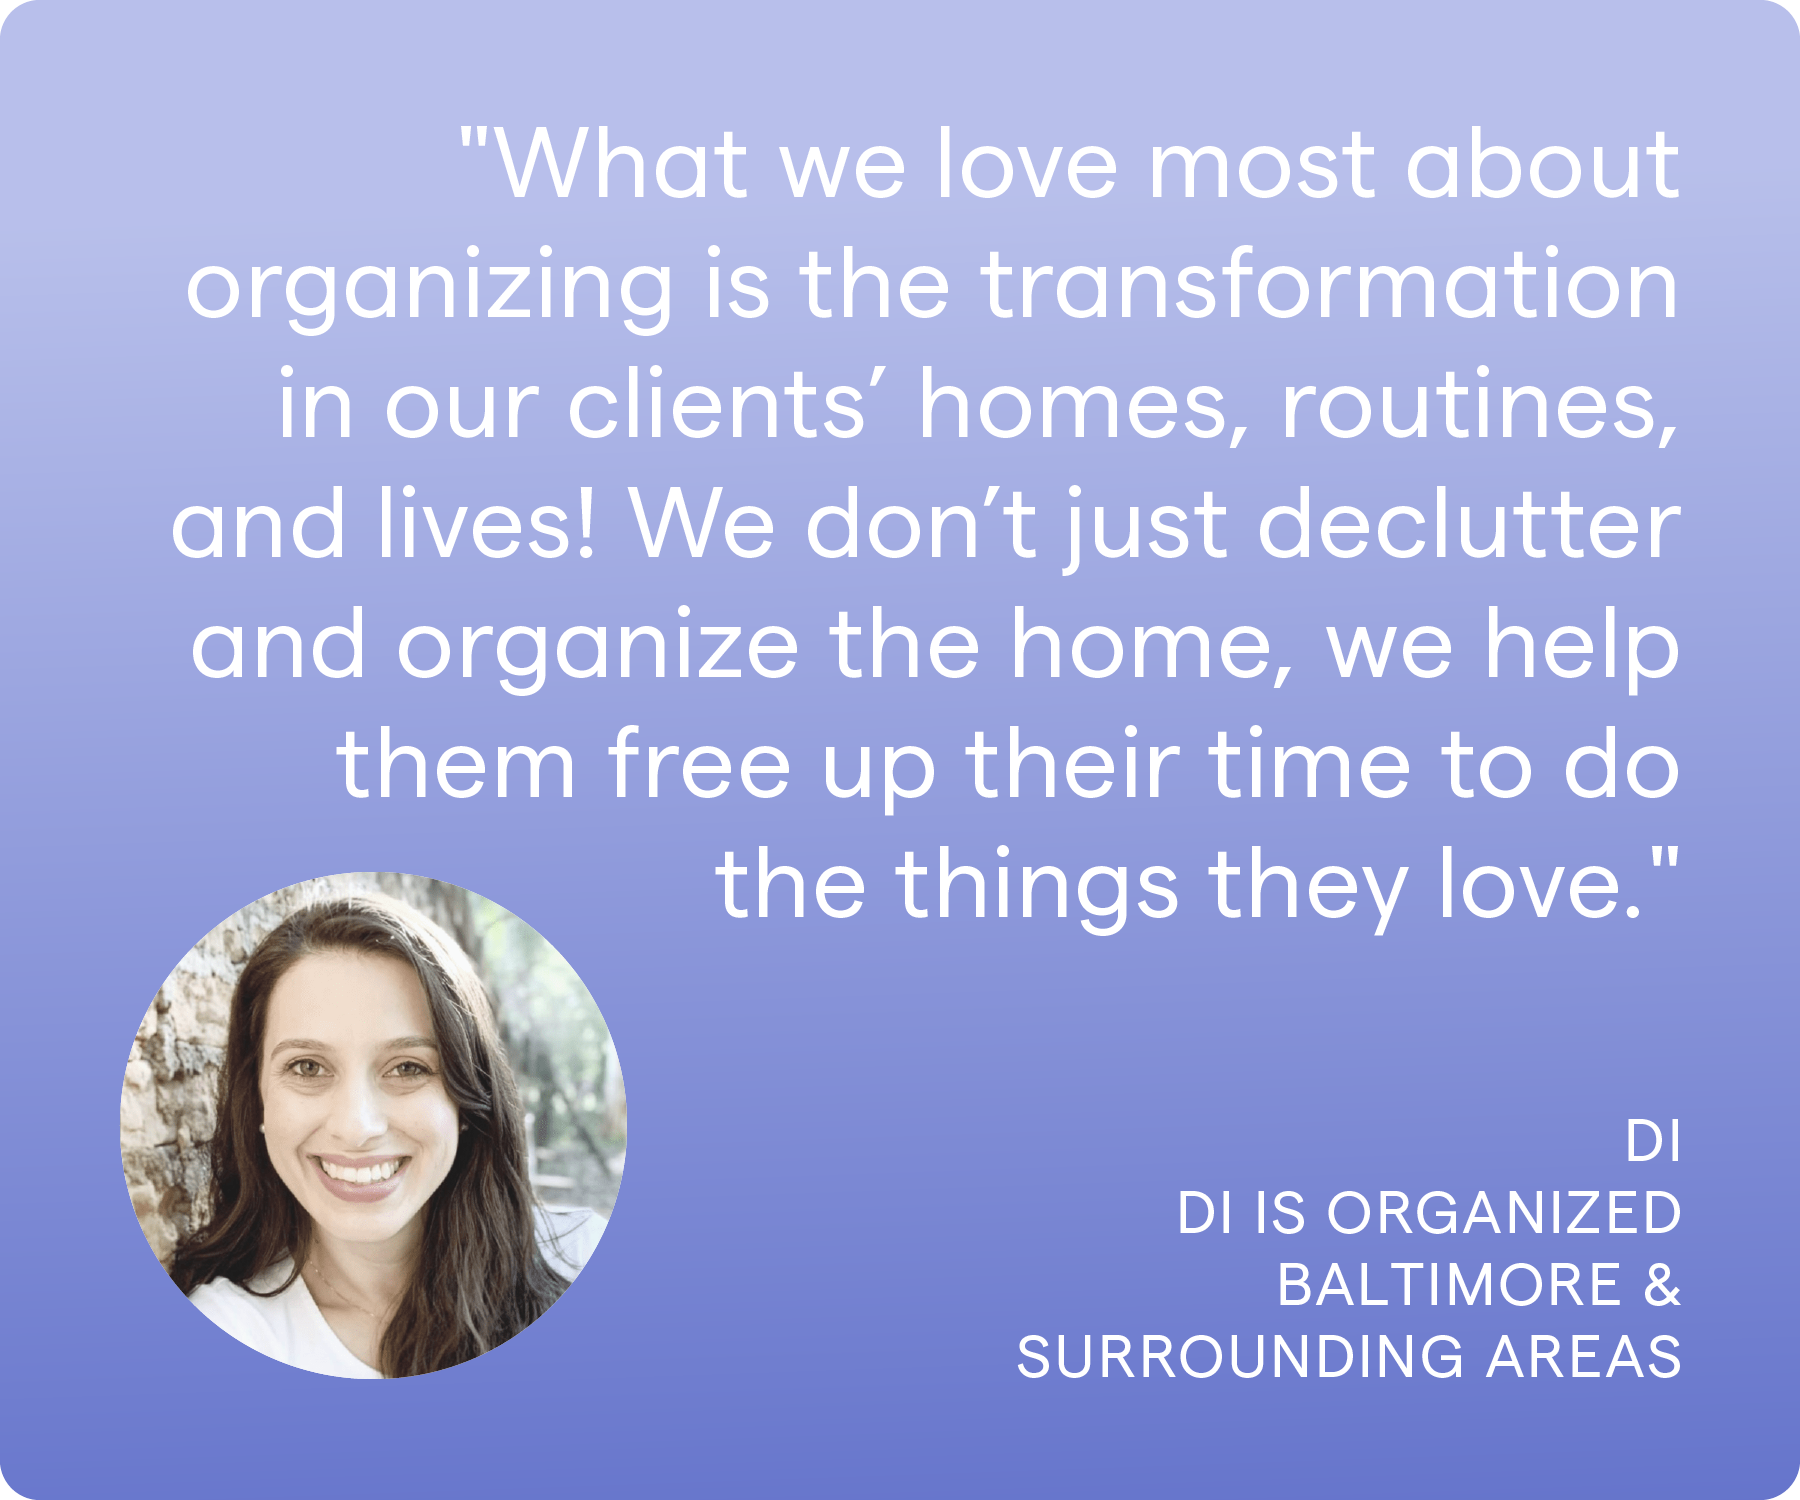 'What we love most about organizing is the transformation in our clients' homes, routines, and lives! We don't just declutter and organize the home, we help them free up their time to do the things they love.' Di, Di is Organized, Baltimore & Surrounding Areas